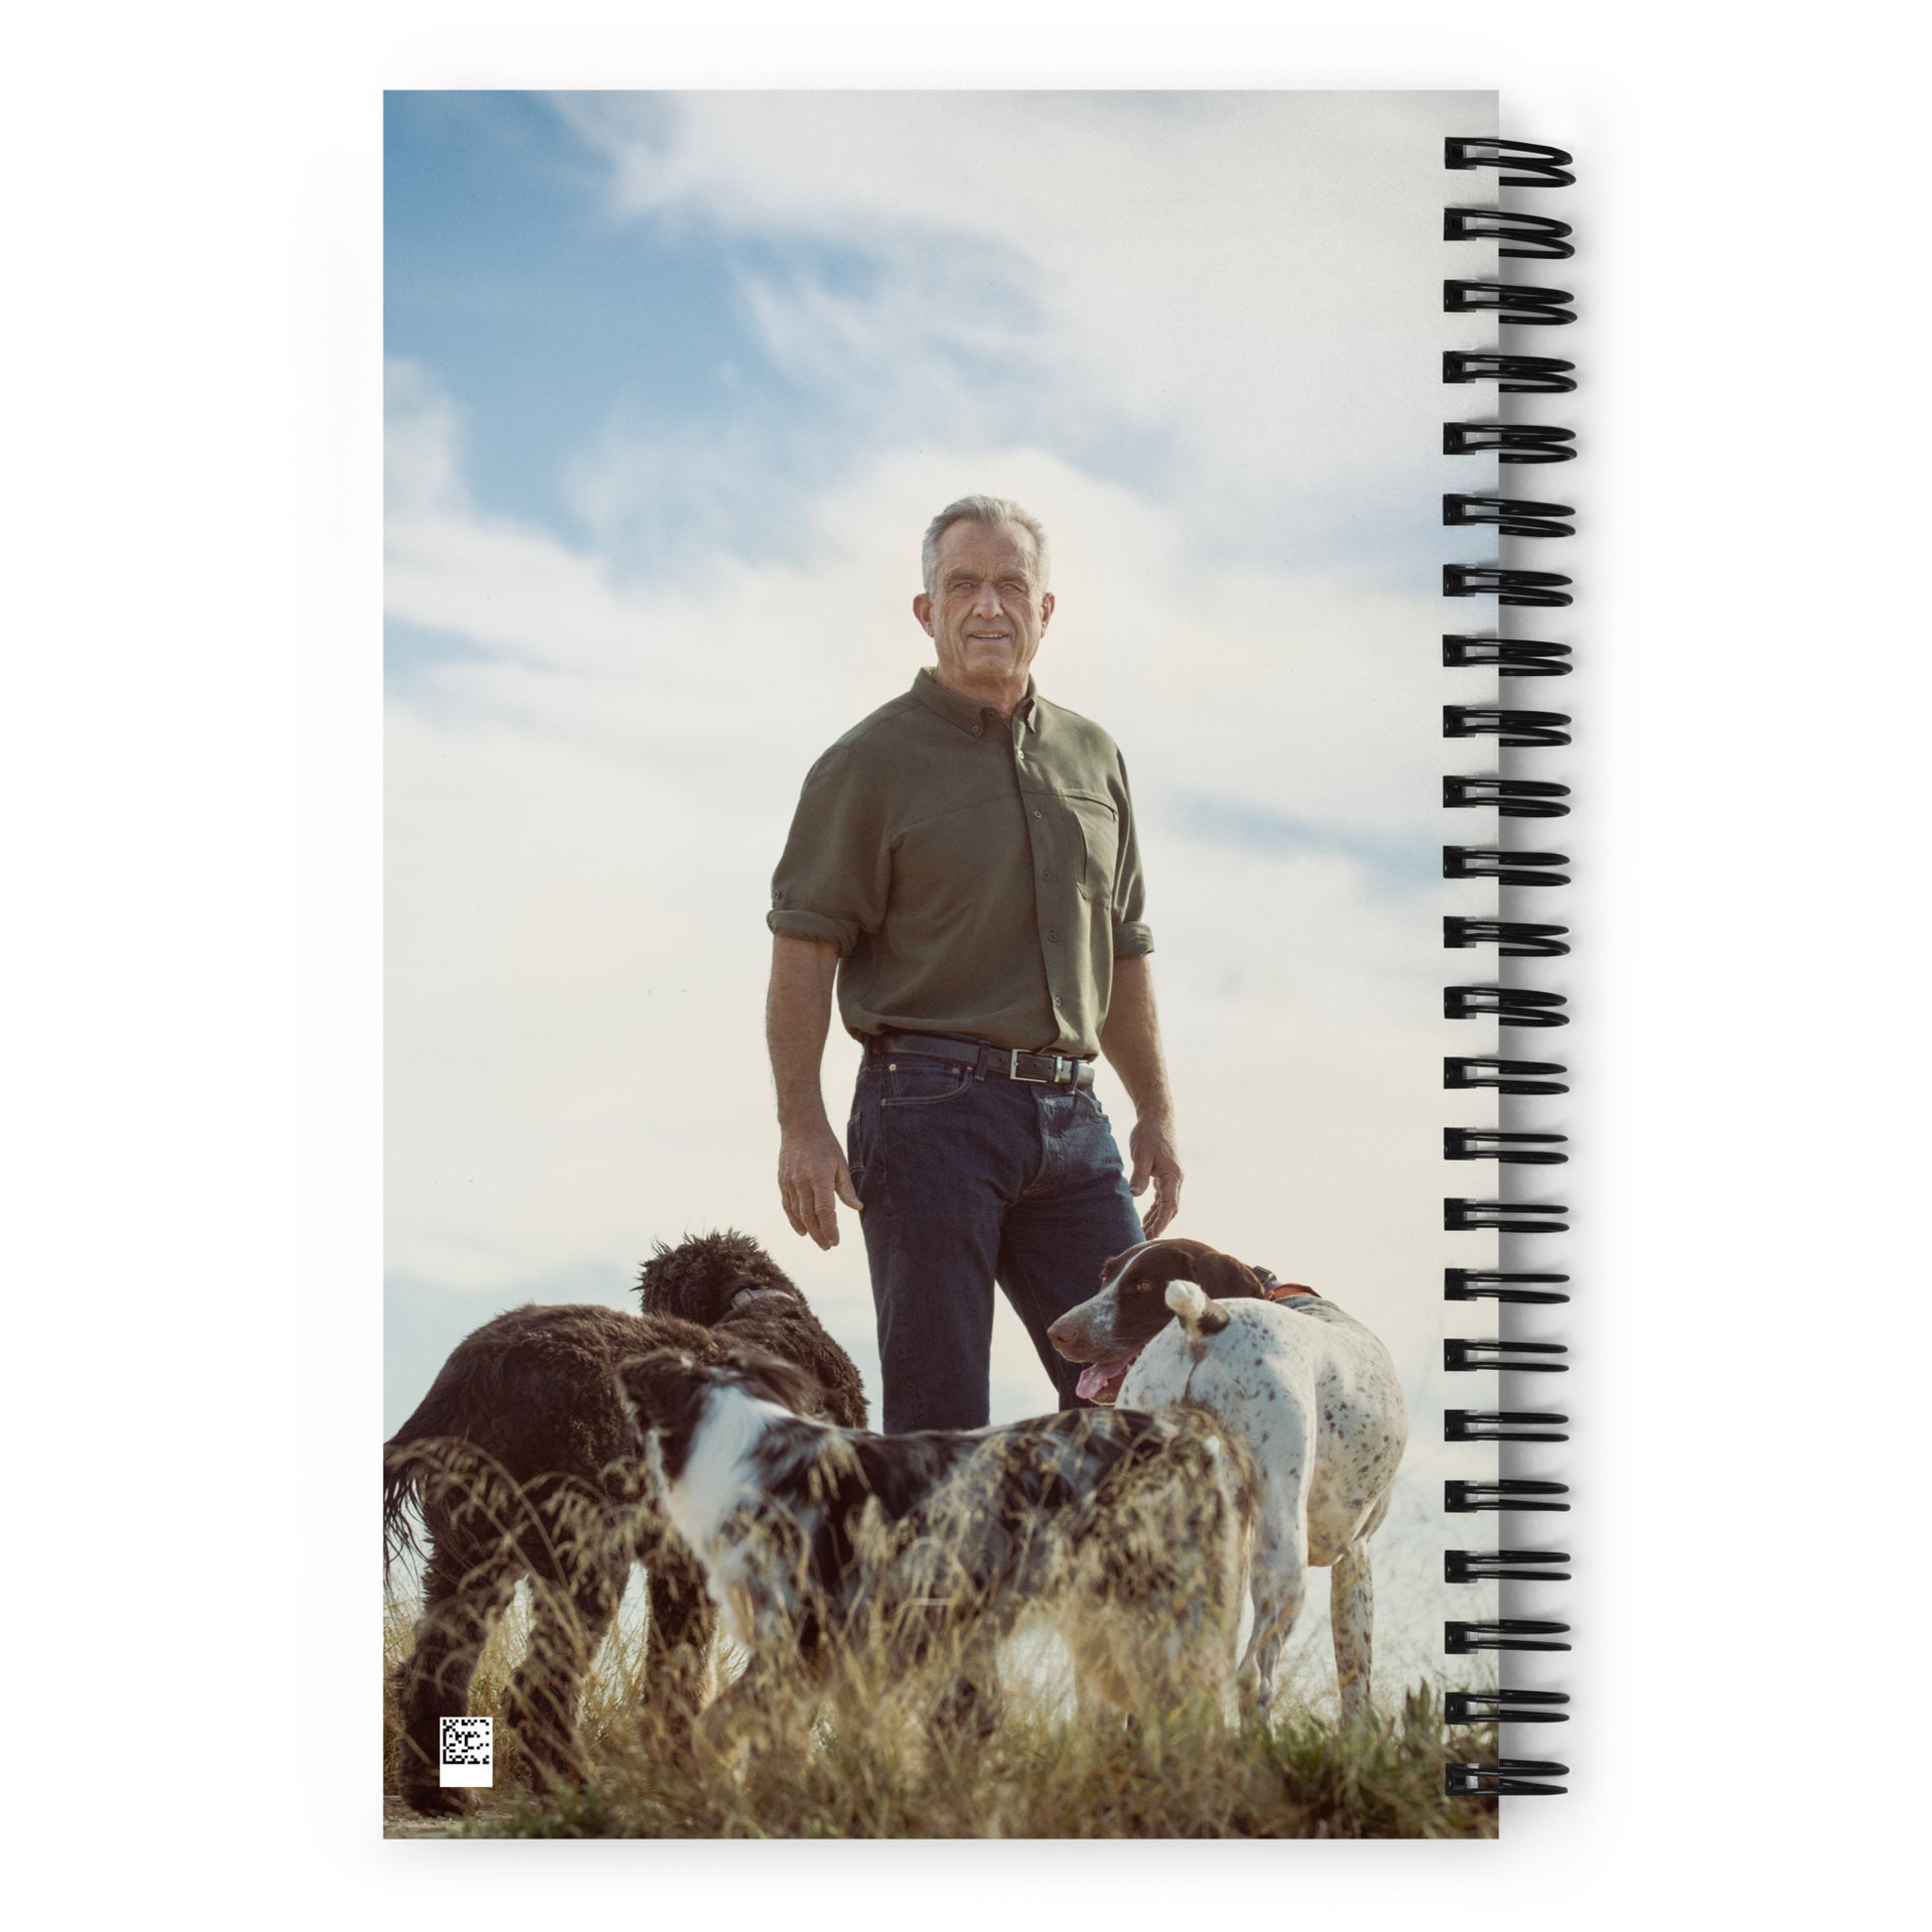 Back of the Kennedy24 navy blue spiral notebook with a photo of RFK Jr. and his dogs.